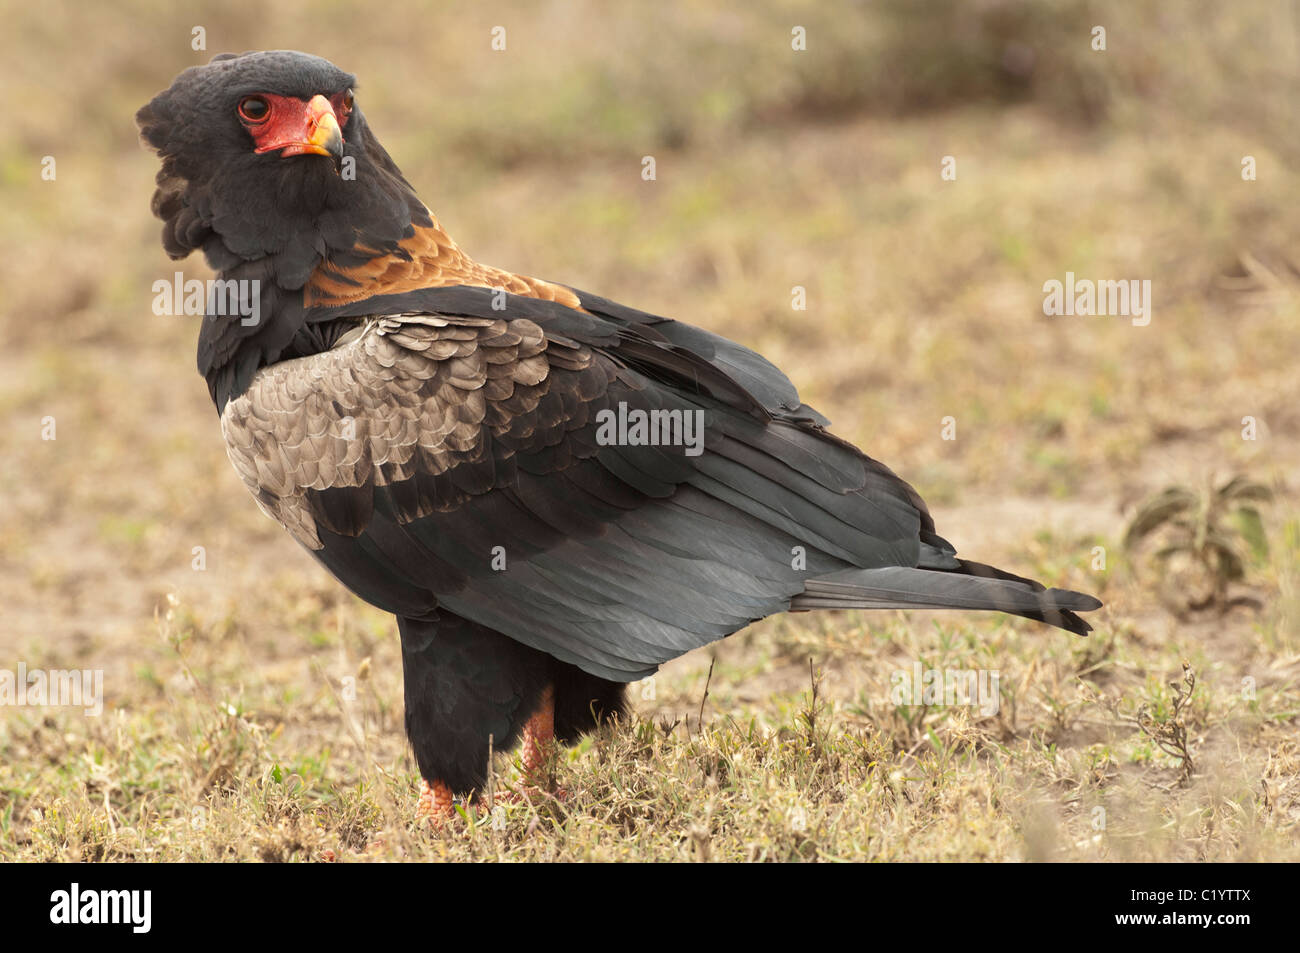 Stock photo of a Bateleur eagle standing on the short-grass plains of the Serengeti ecosystem. Stock Photo